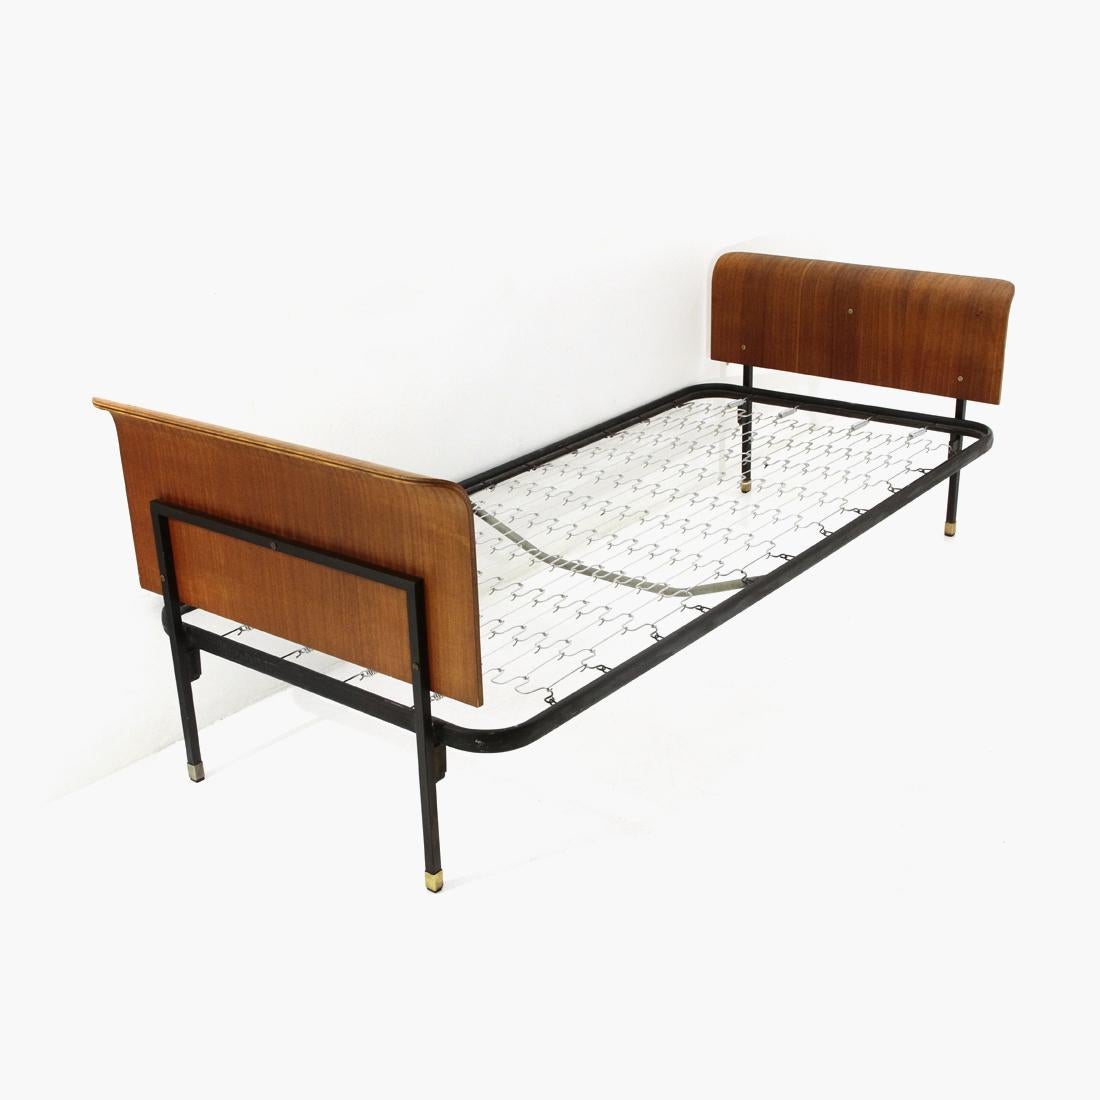 Mid-Century Modern Single Bed with Headboard and Footboard in Curved Plywood, 1950s